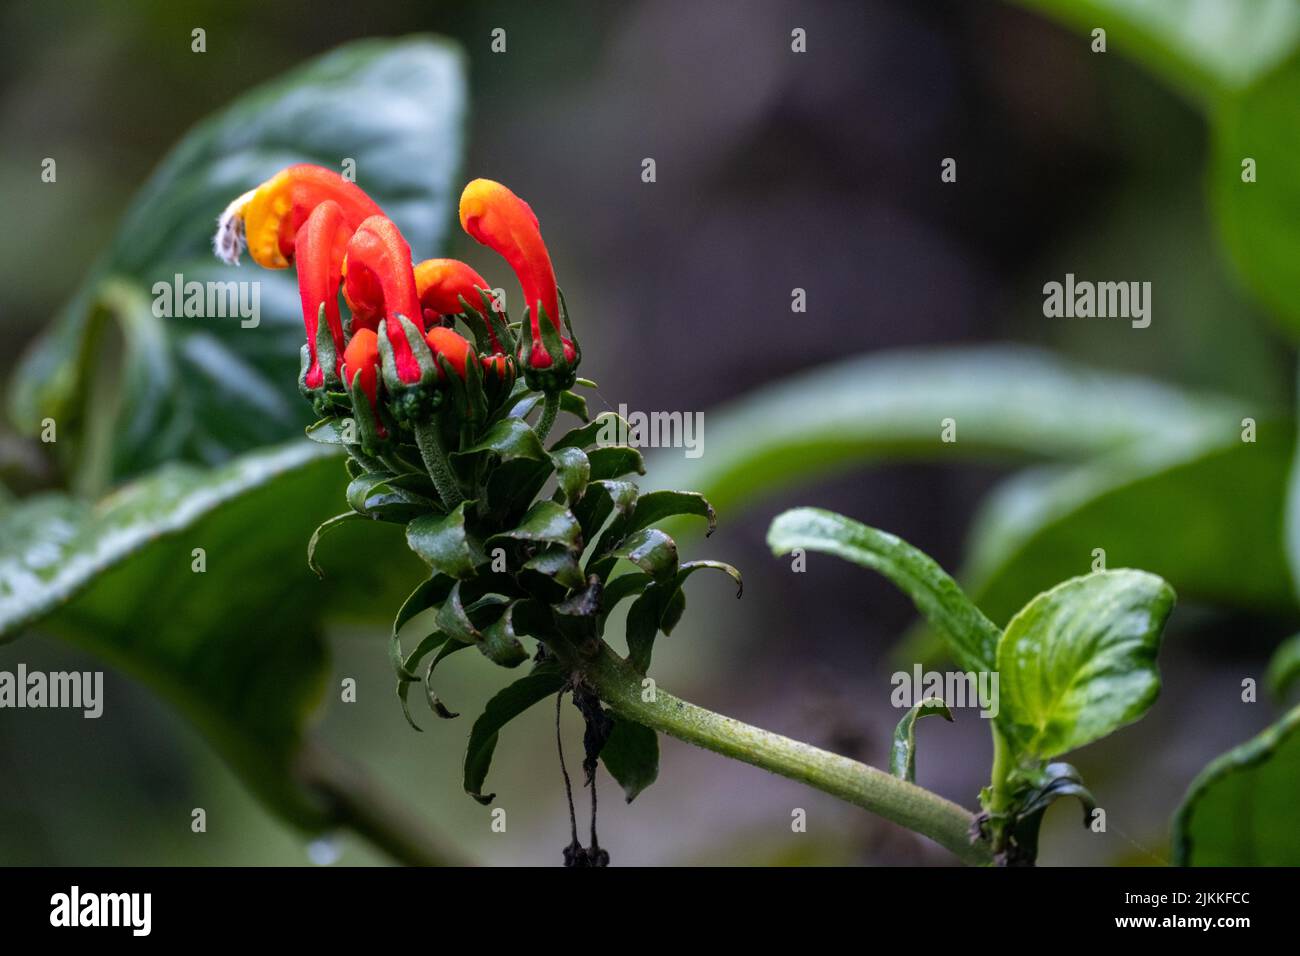 A closeup shot of centropogon granulosus plant flowering in the garden in daylight with blurred background Stock Photo